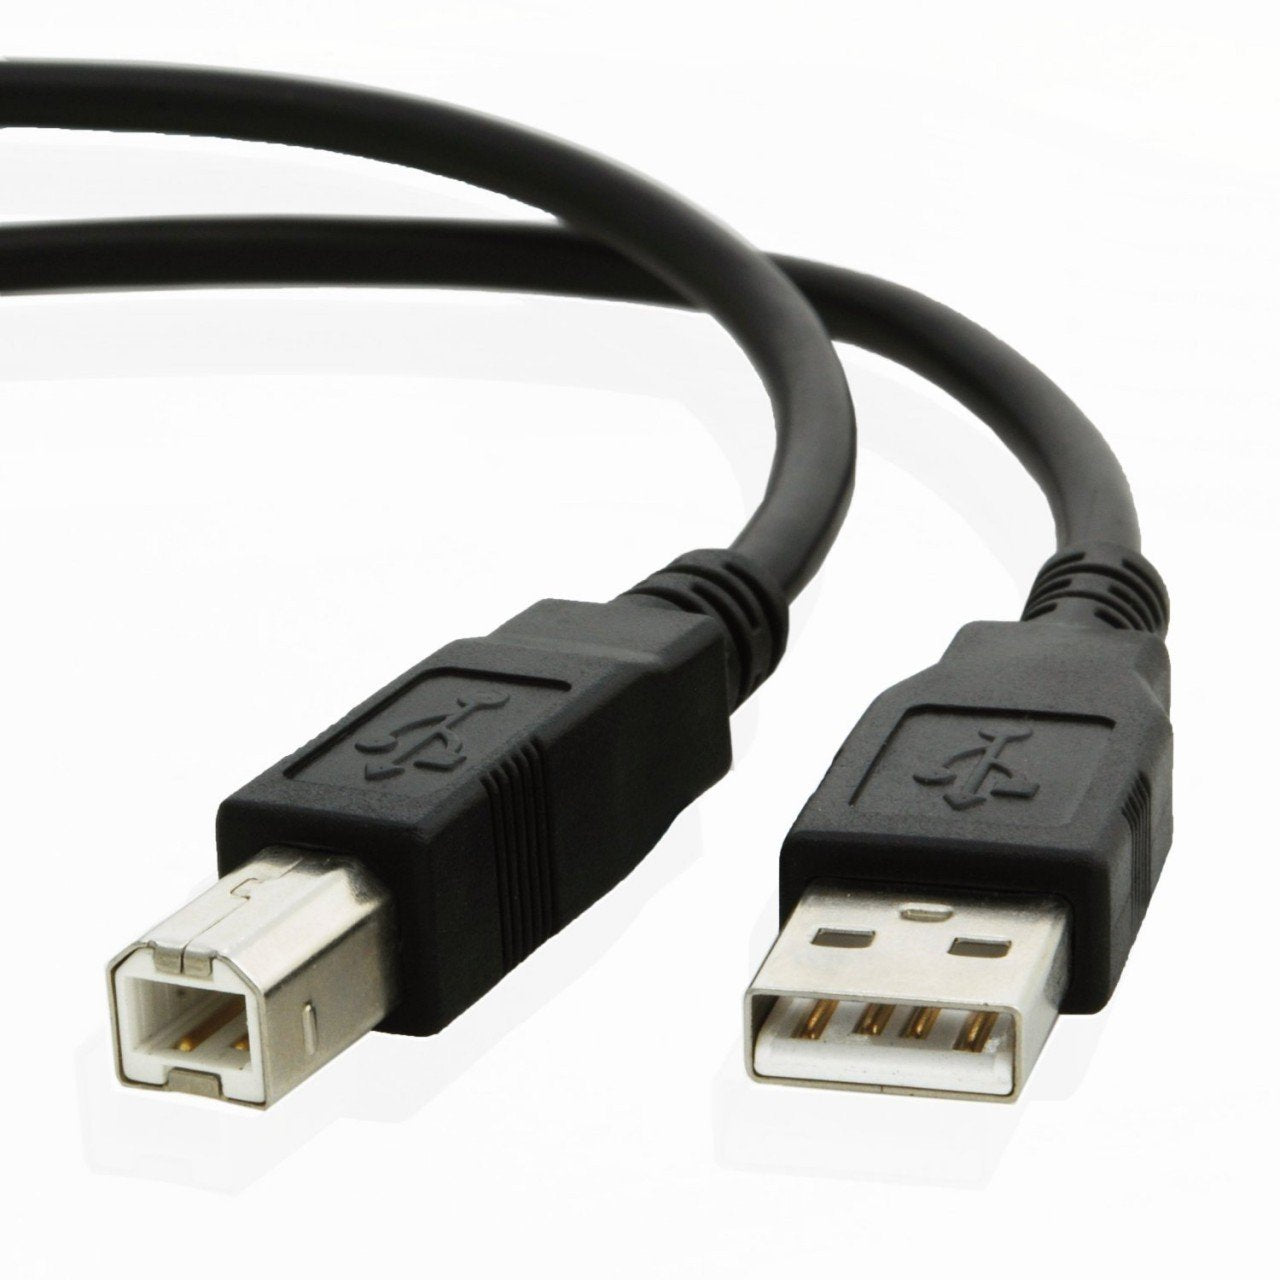 USB cable for Mxl USB.006